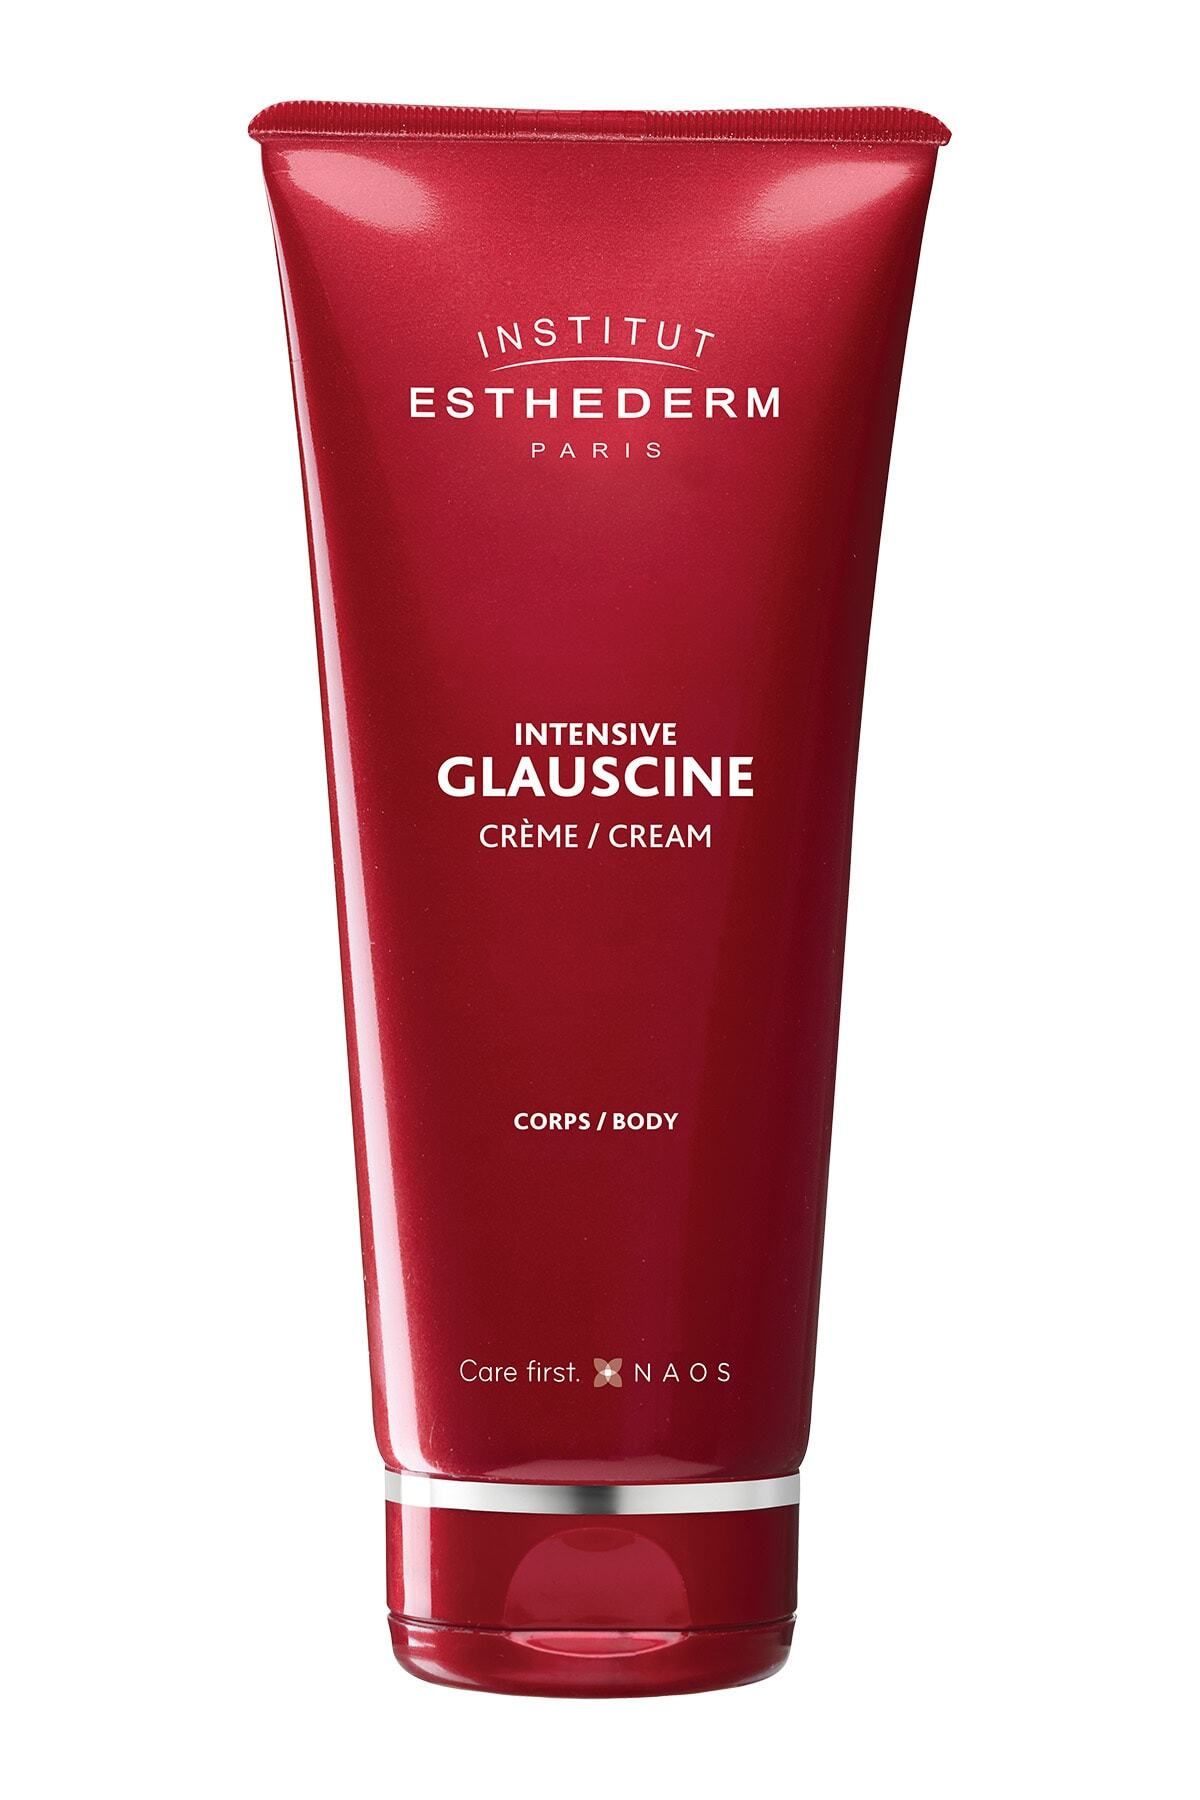 INSTITUT ESTHEDERM CARE INTENSİVE GLAUSCİNE CREAM FOR STUBBORN AND ESTABLİSHED CELLULİTE 200 ML PSSN481